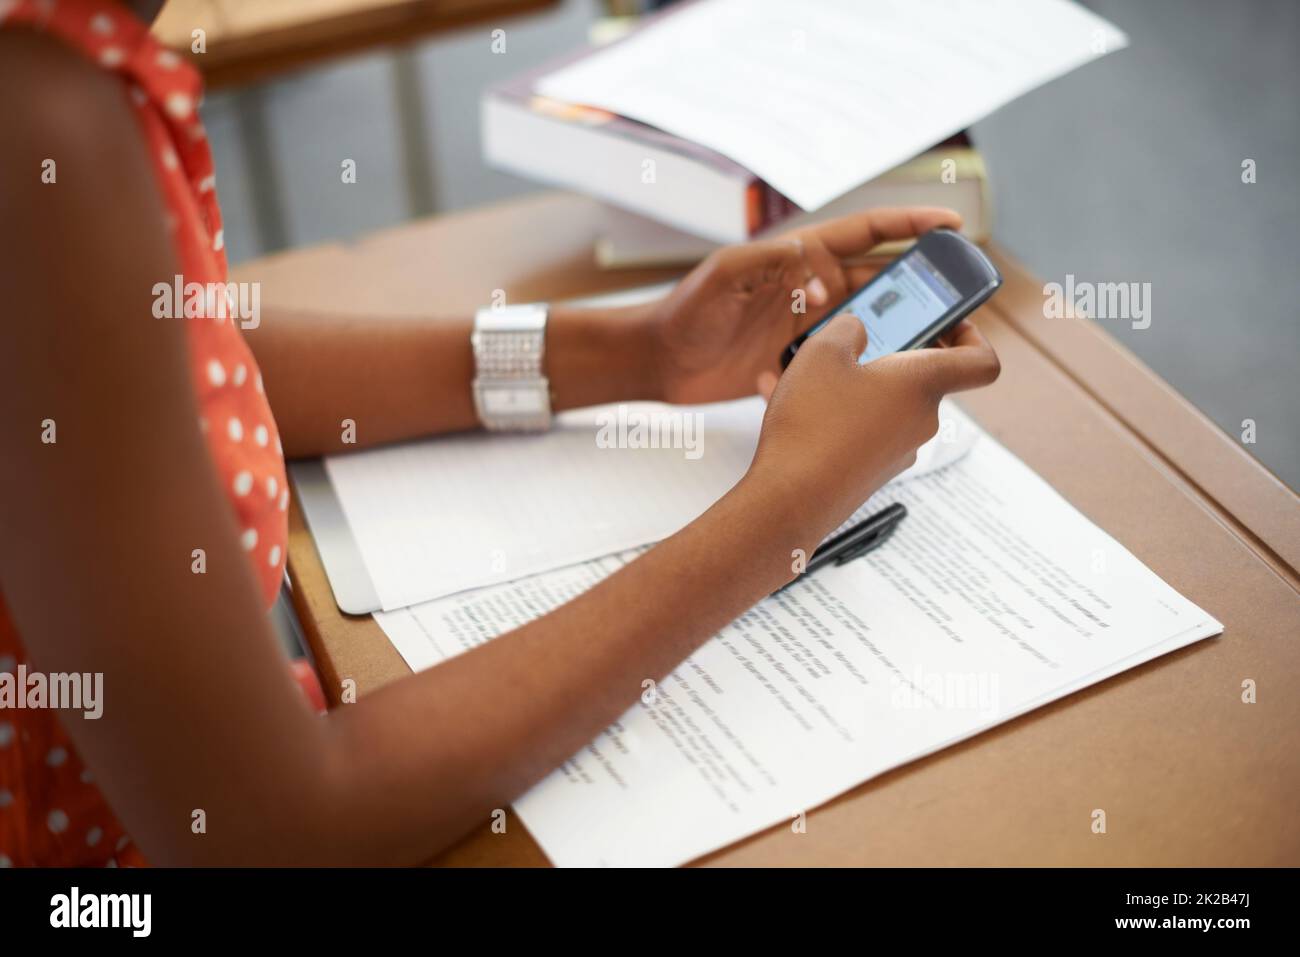 Youll learn nothing if you take shortcuts. A student using the internet to cheat on her exam. Stock Photo